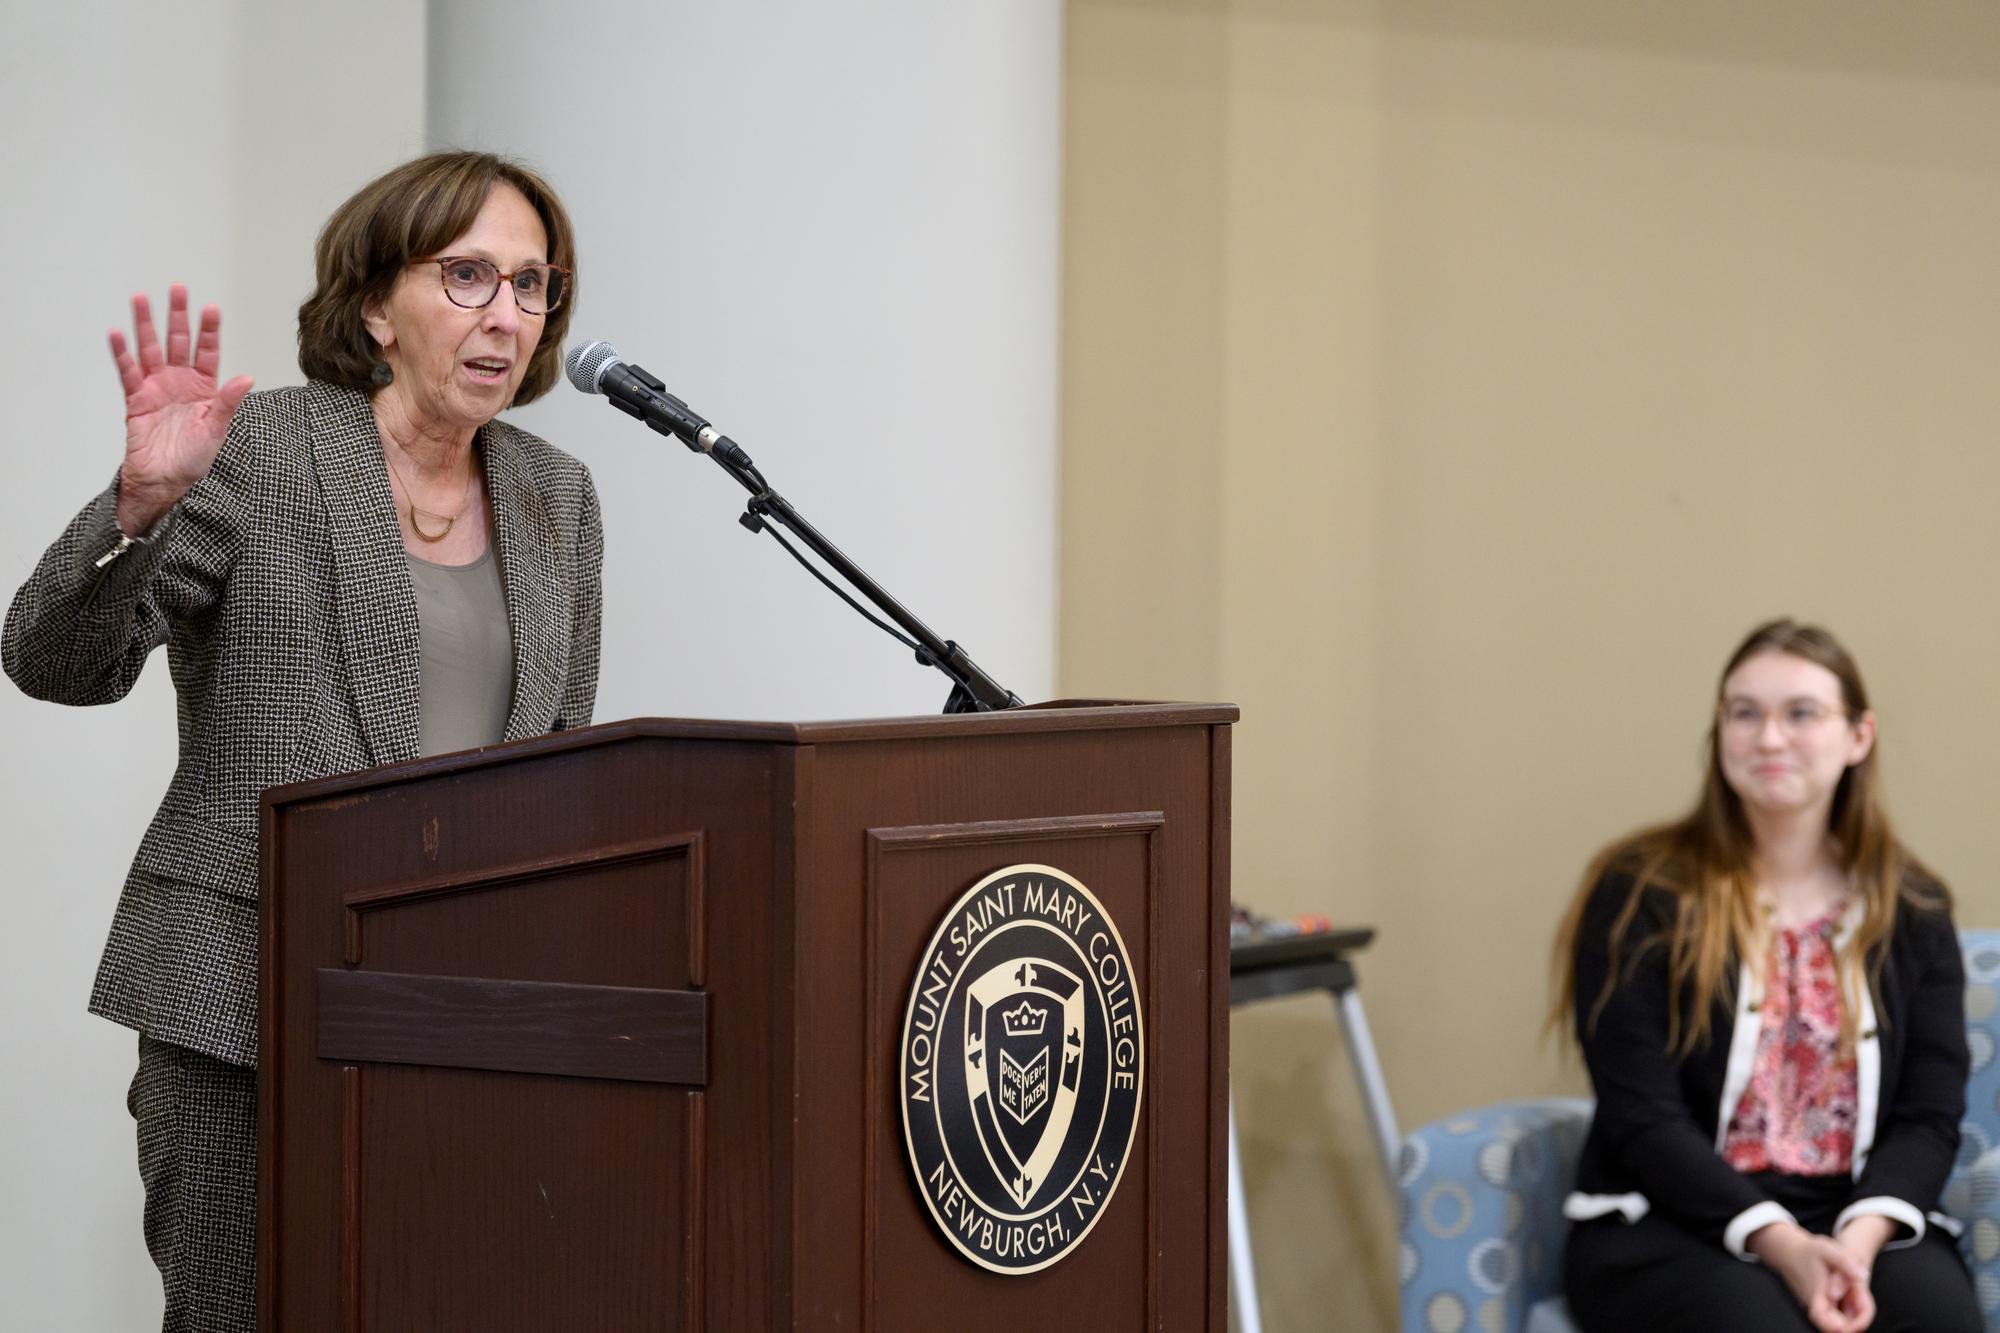   The Honorable Sandra B. Sciortino, Justice of the Supreme Court of the State of New York, Orange County, served as the keynote speaker of “The Triumphs and Obstacles Faced by Women in Law.”  